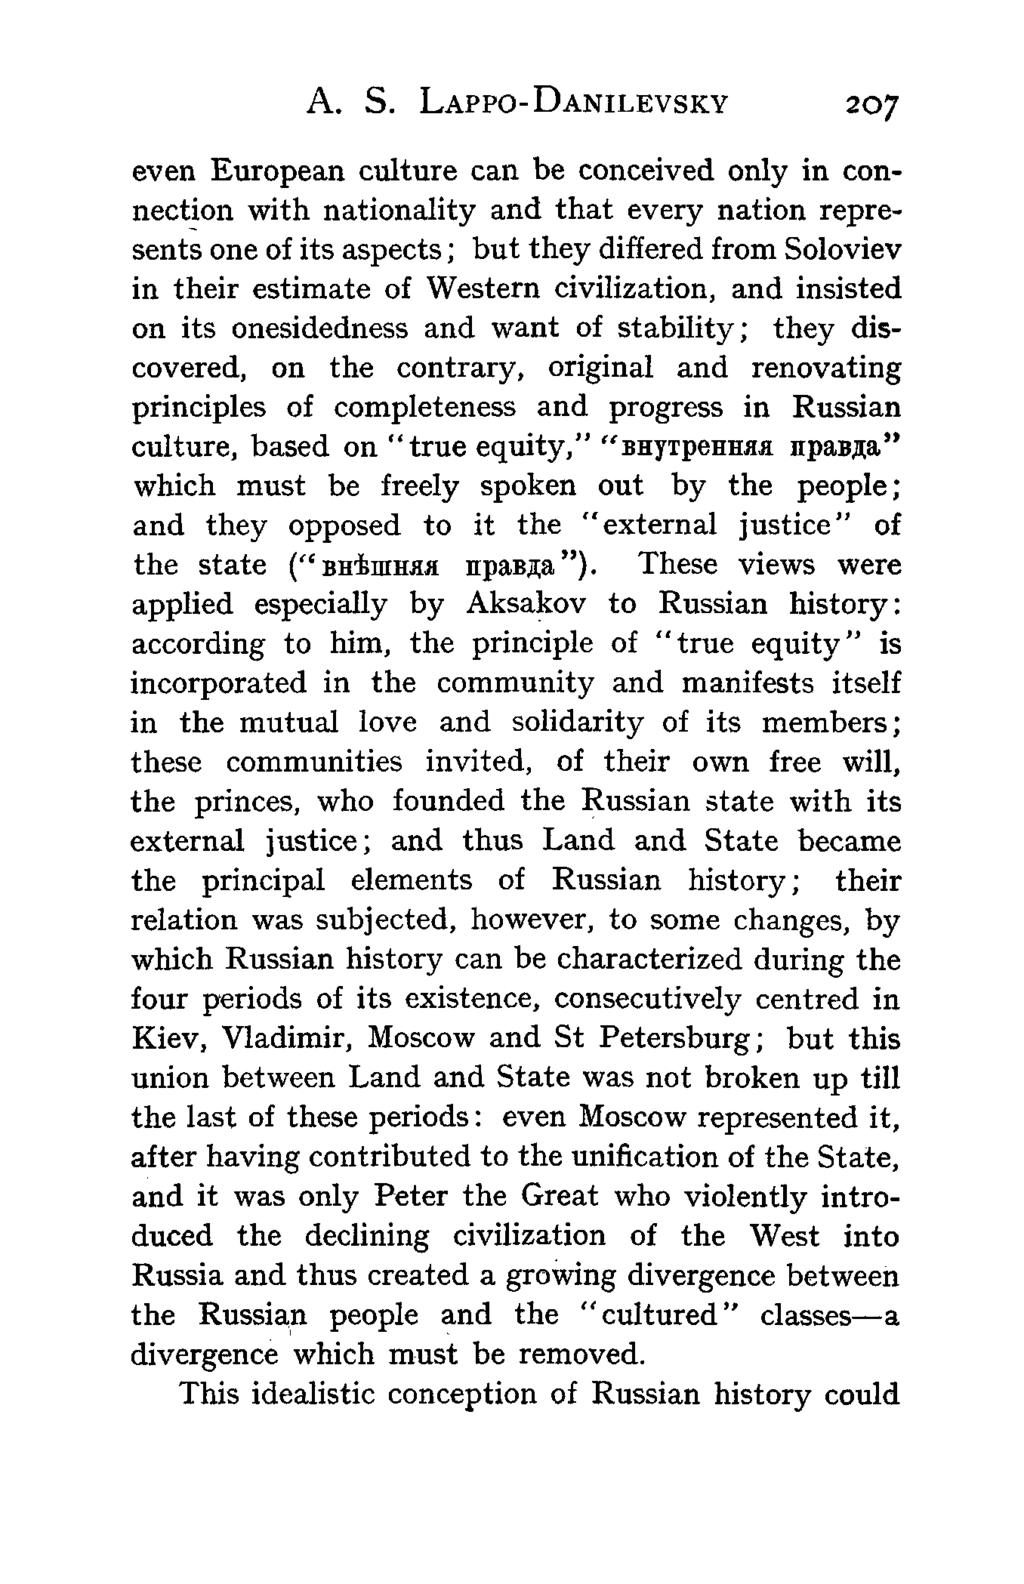 A. S. LAPPO-DANILEVSKY 207 even European culture can be conceived only in connection with nationality and that every nation represents one of its aspects; but they differed from Soloviev in their